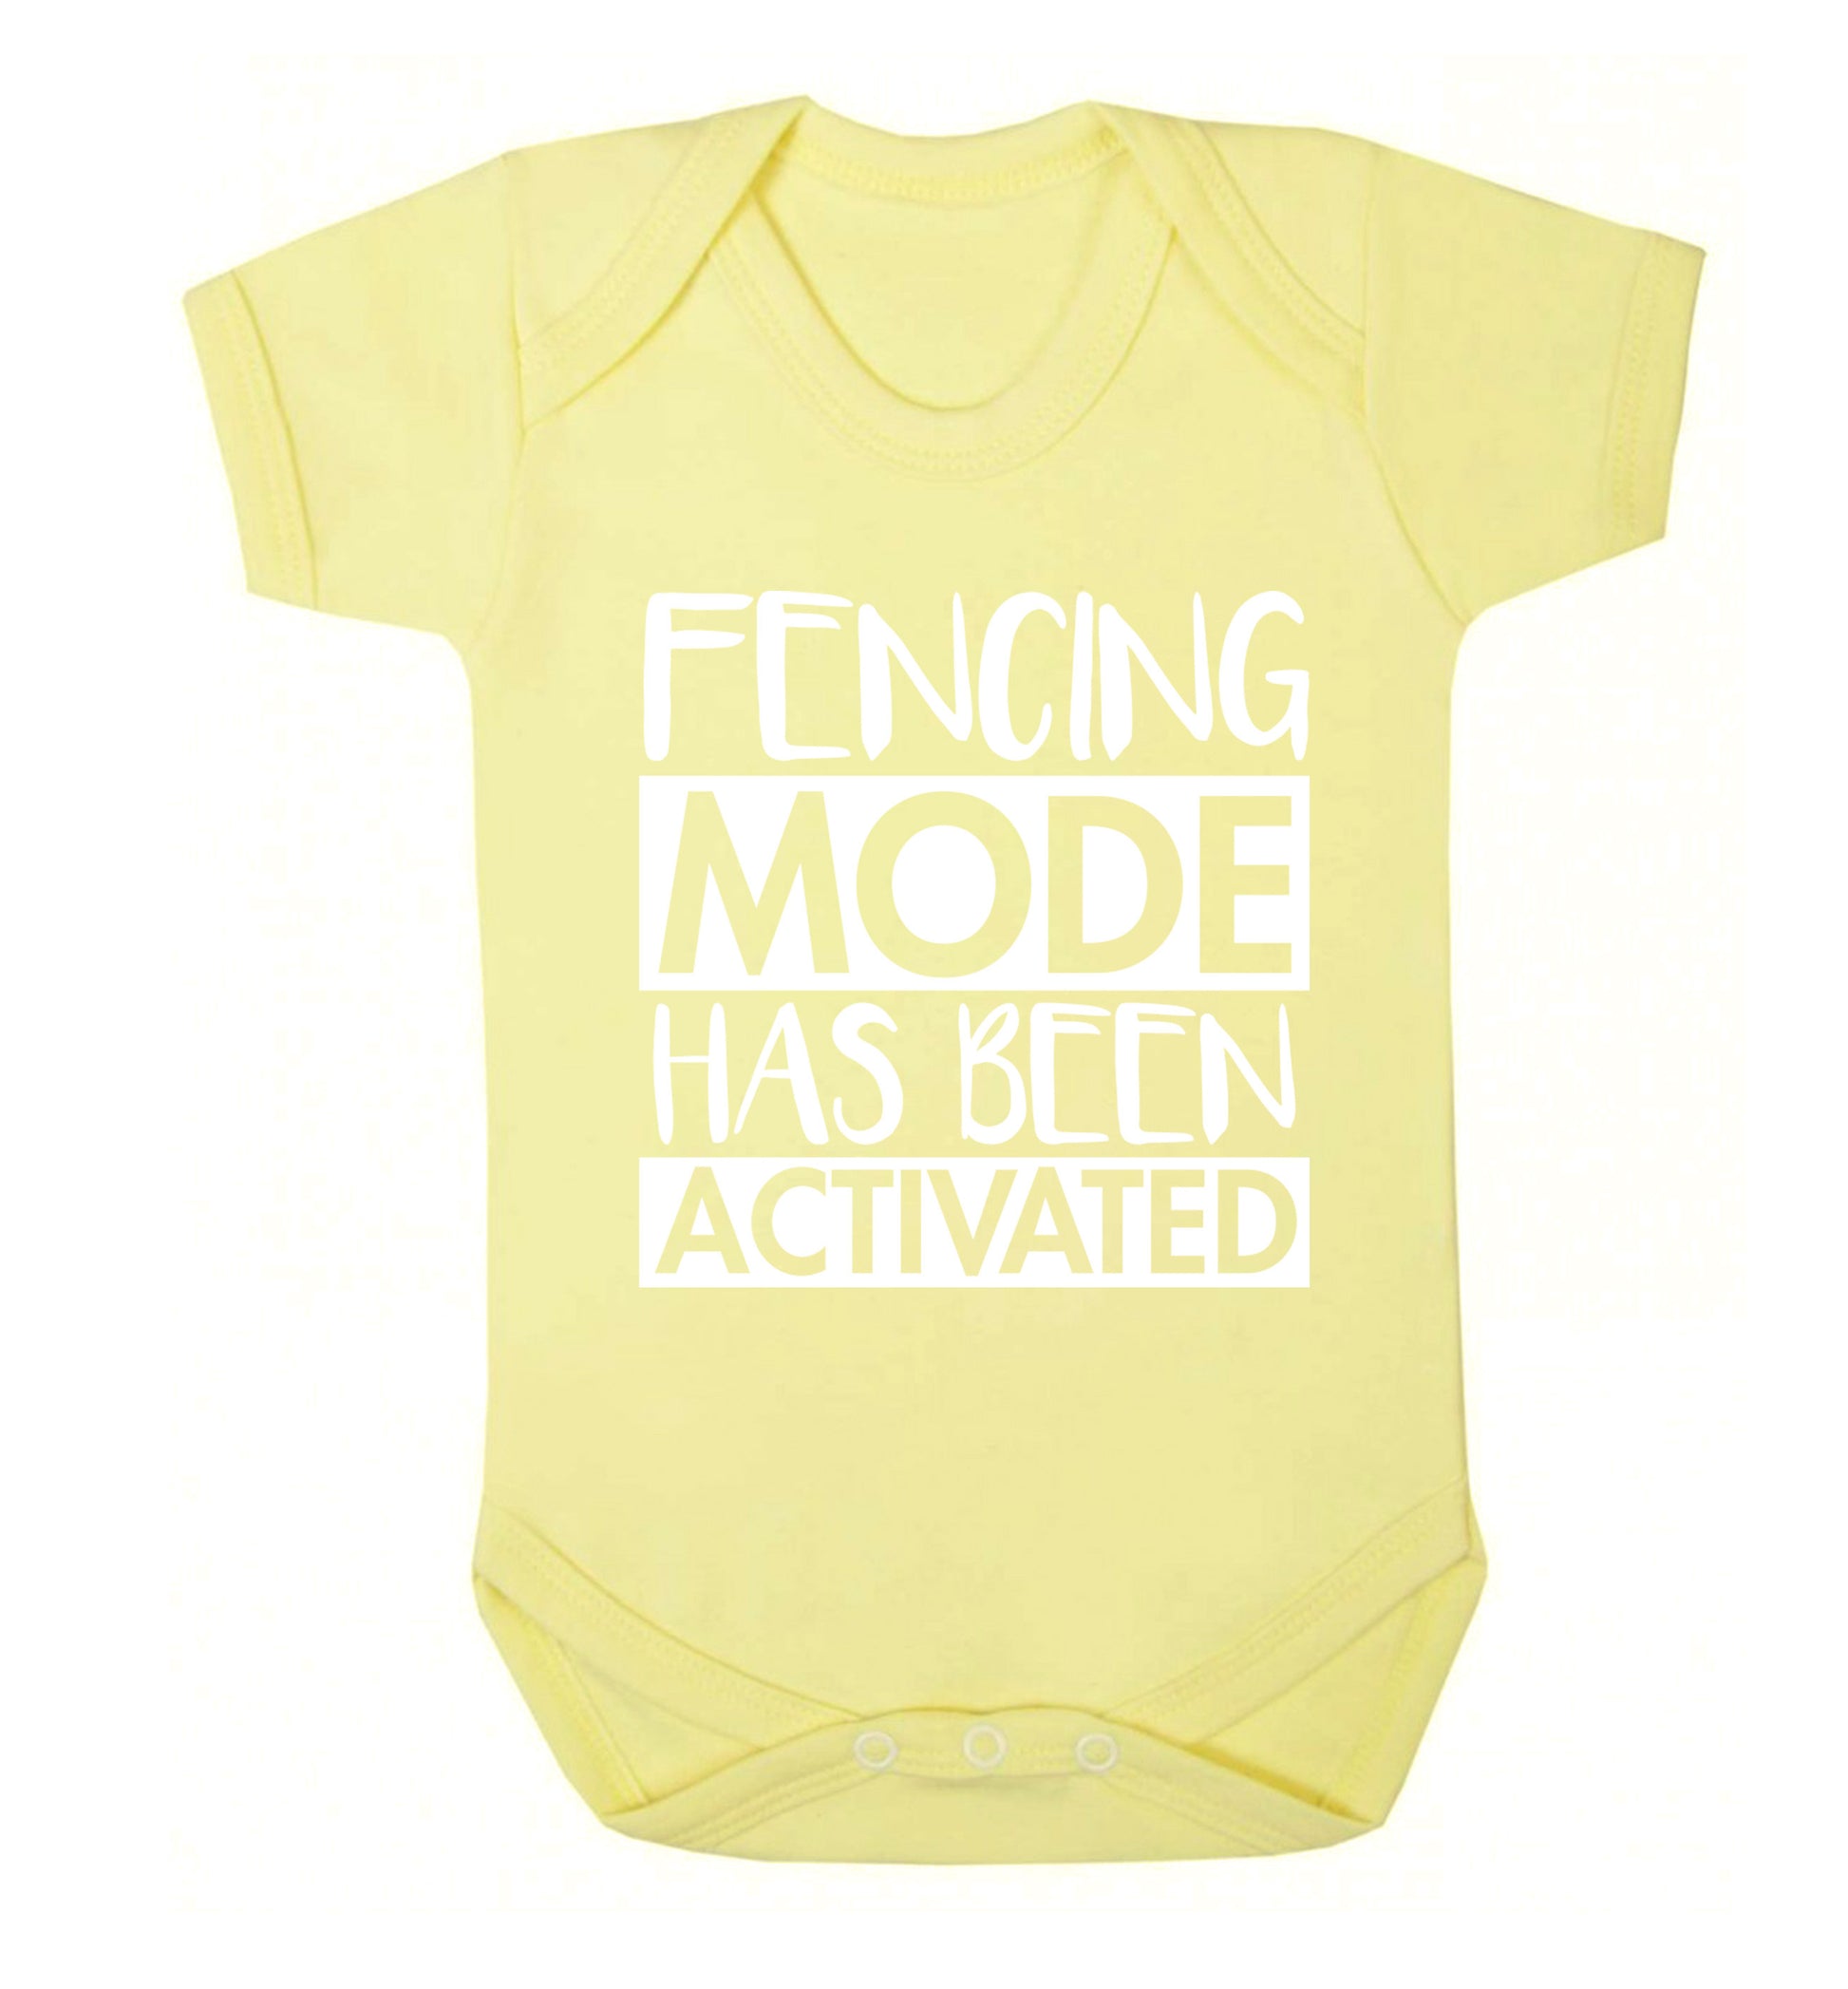 Fencing mode activated Baby Vest pale yellow 18-24 months